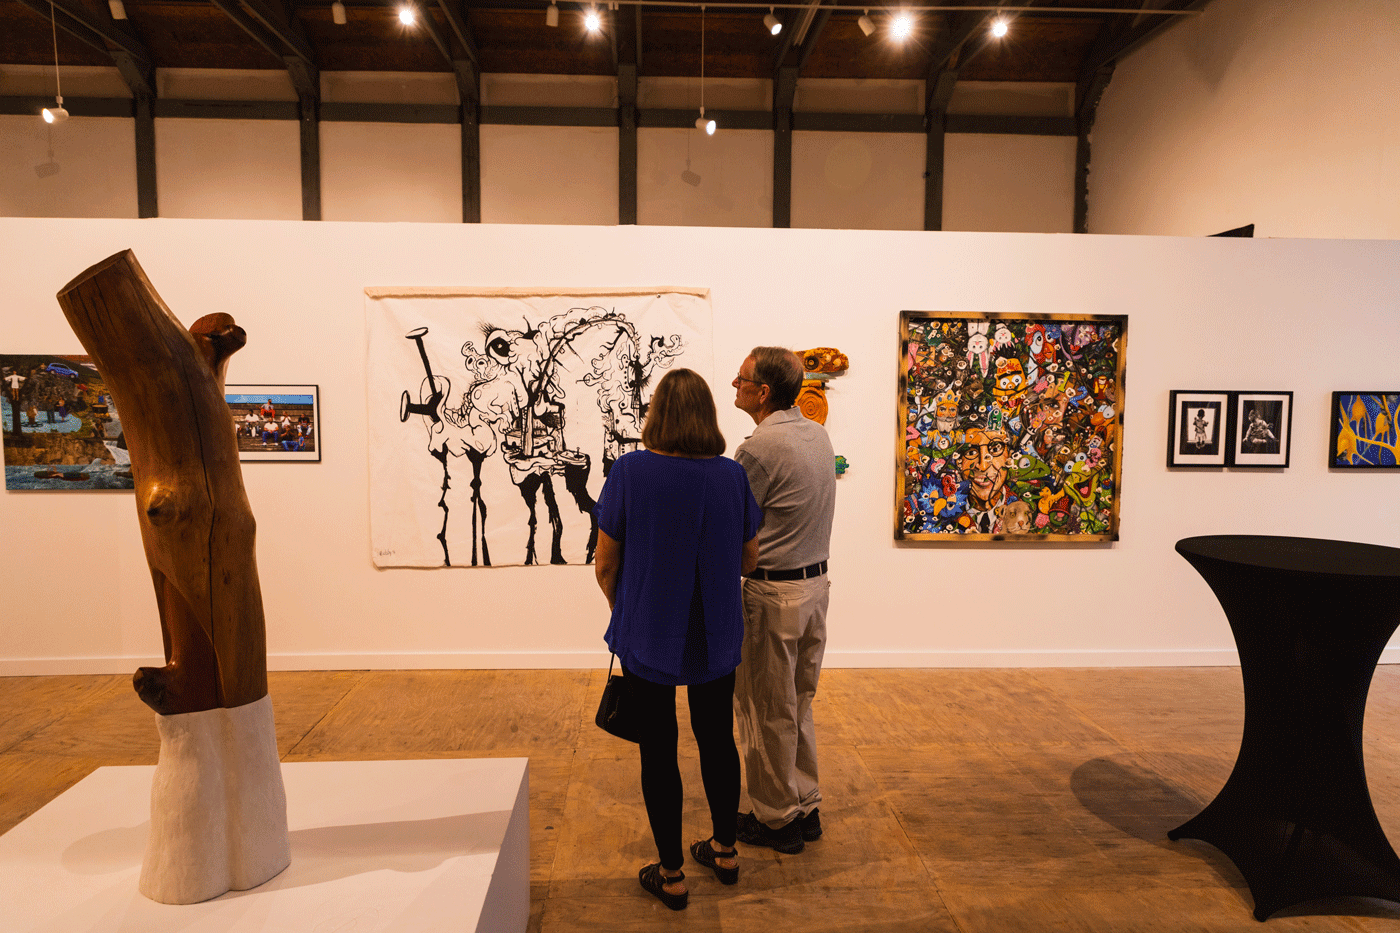 Two people look at art on the walls of a gallery